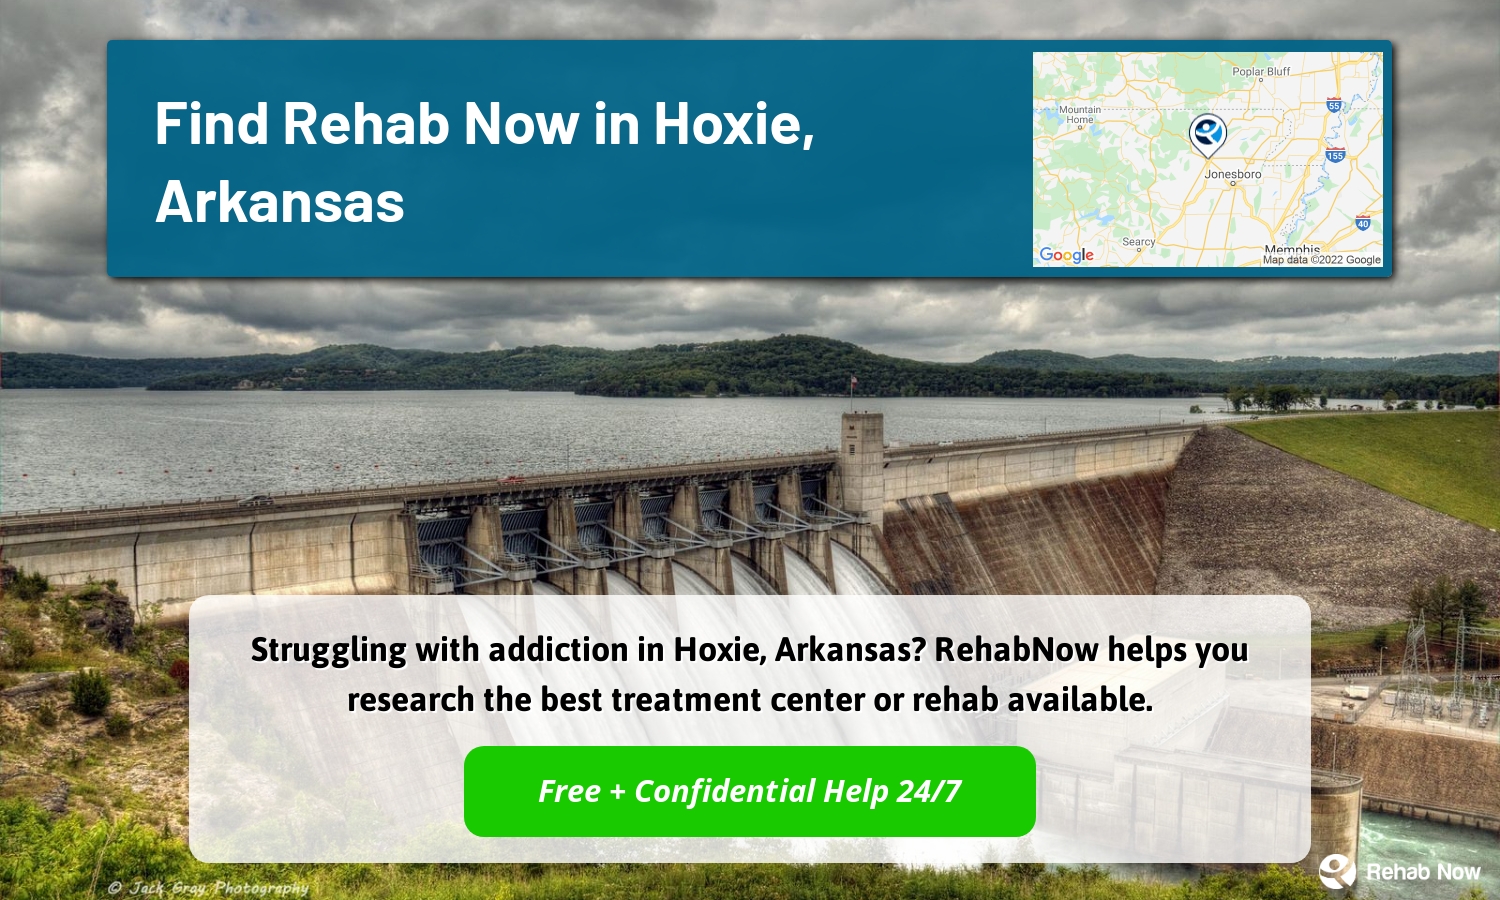 Struggling with addiction in Hoxie, Arkansas? RehabNow helps you research the best treatment center or rehab available.